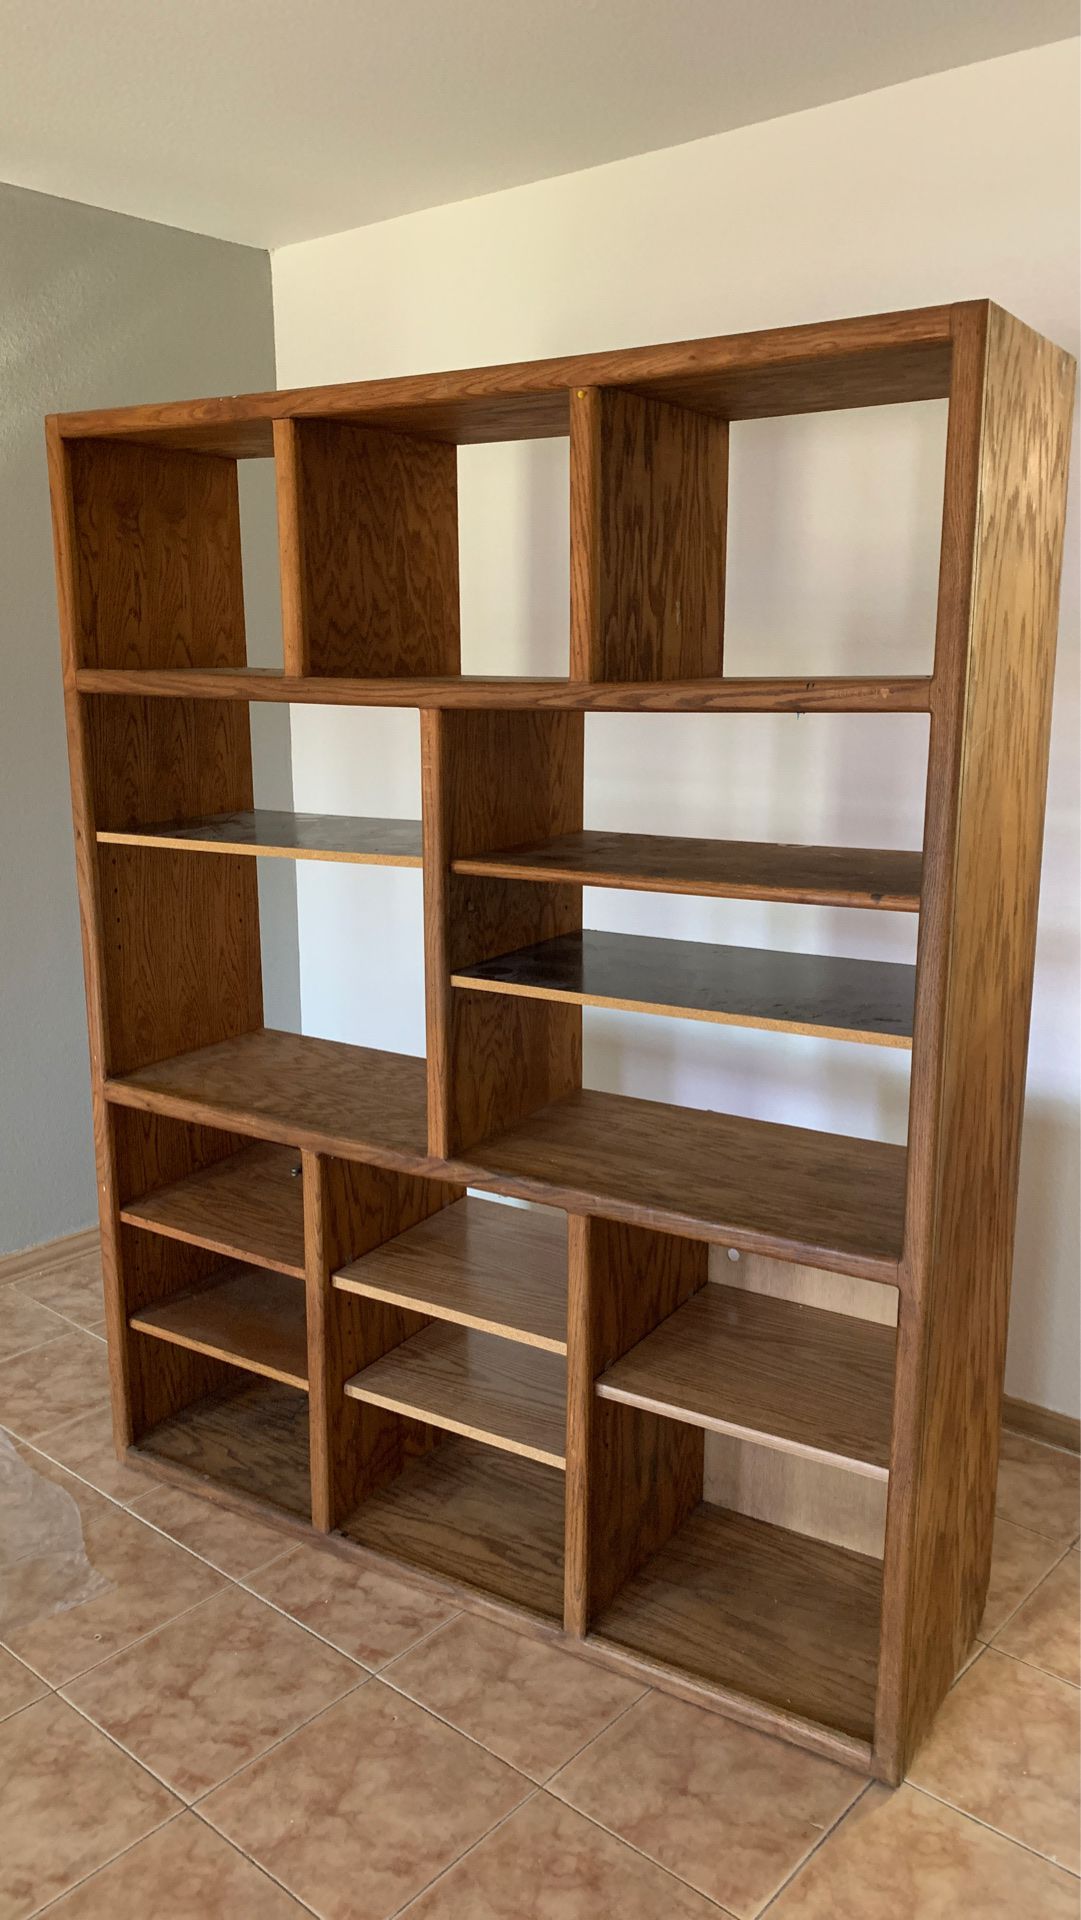 storage / entertainment stand with multiple shelves